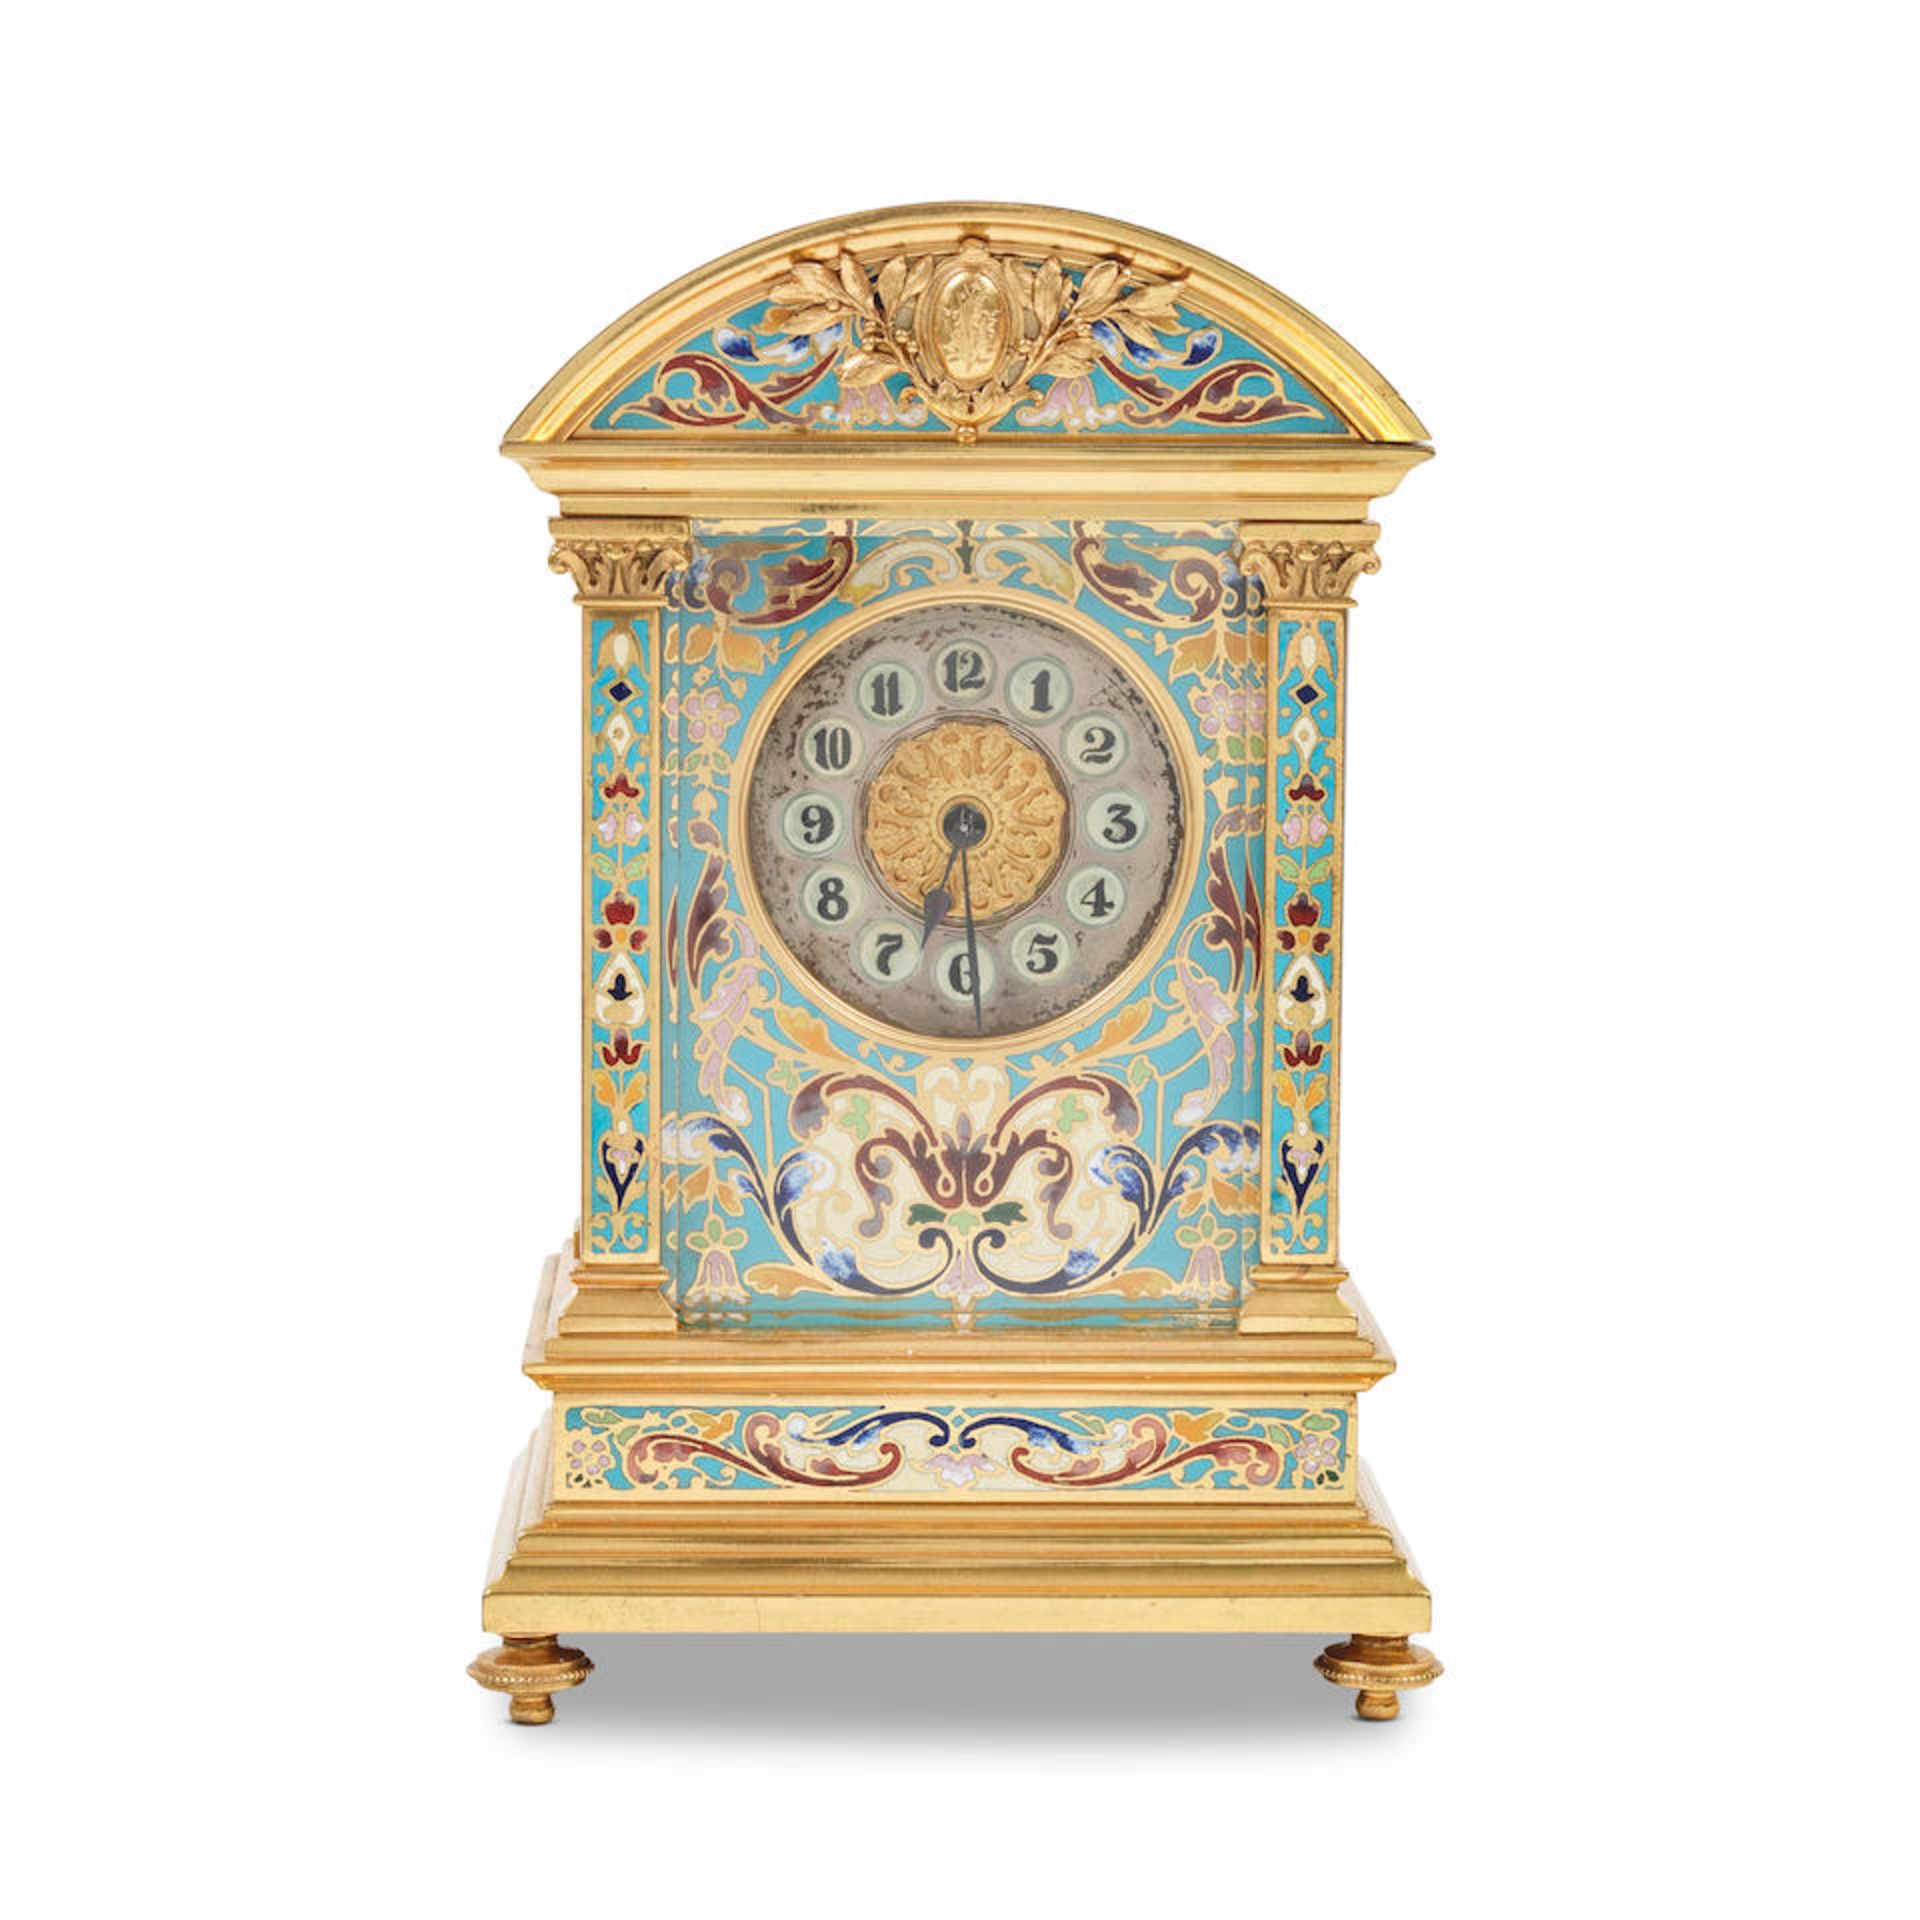 An early 20th century French gilt brass and champlevé enamel mantel clock